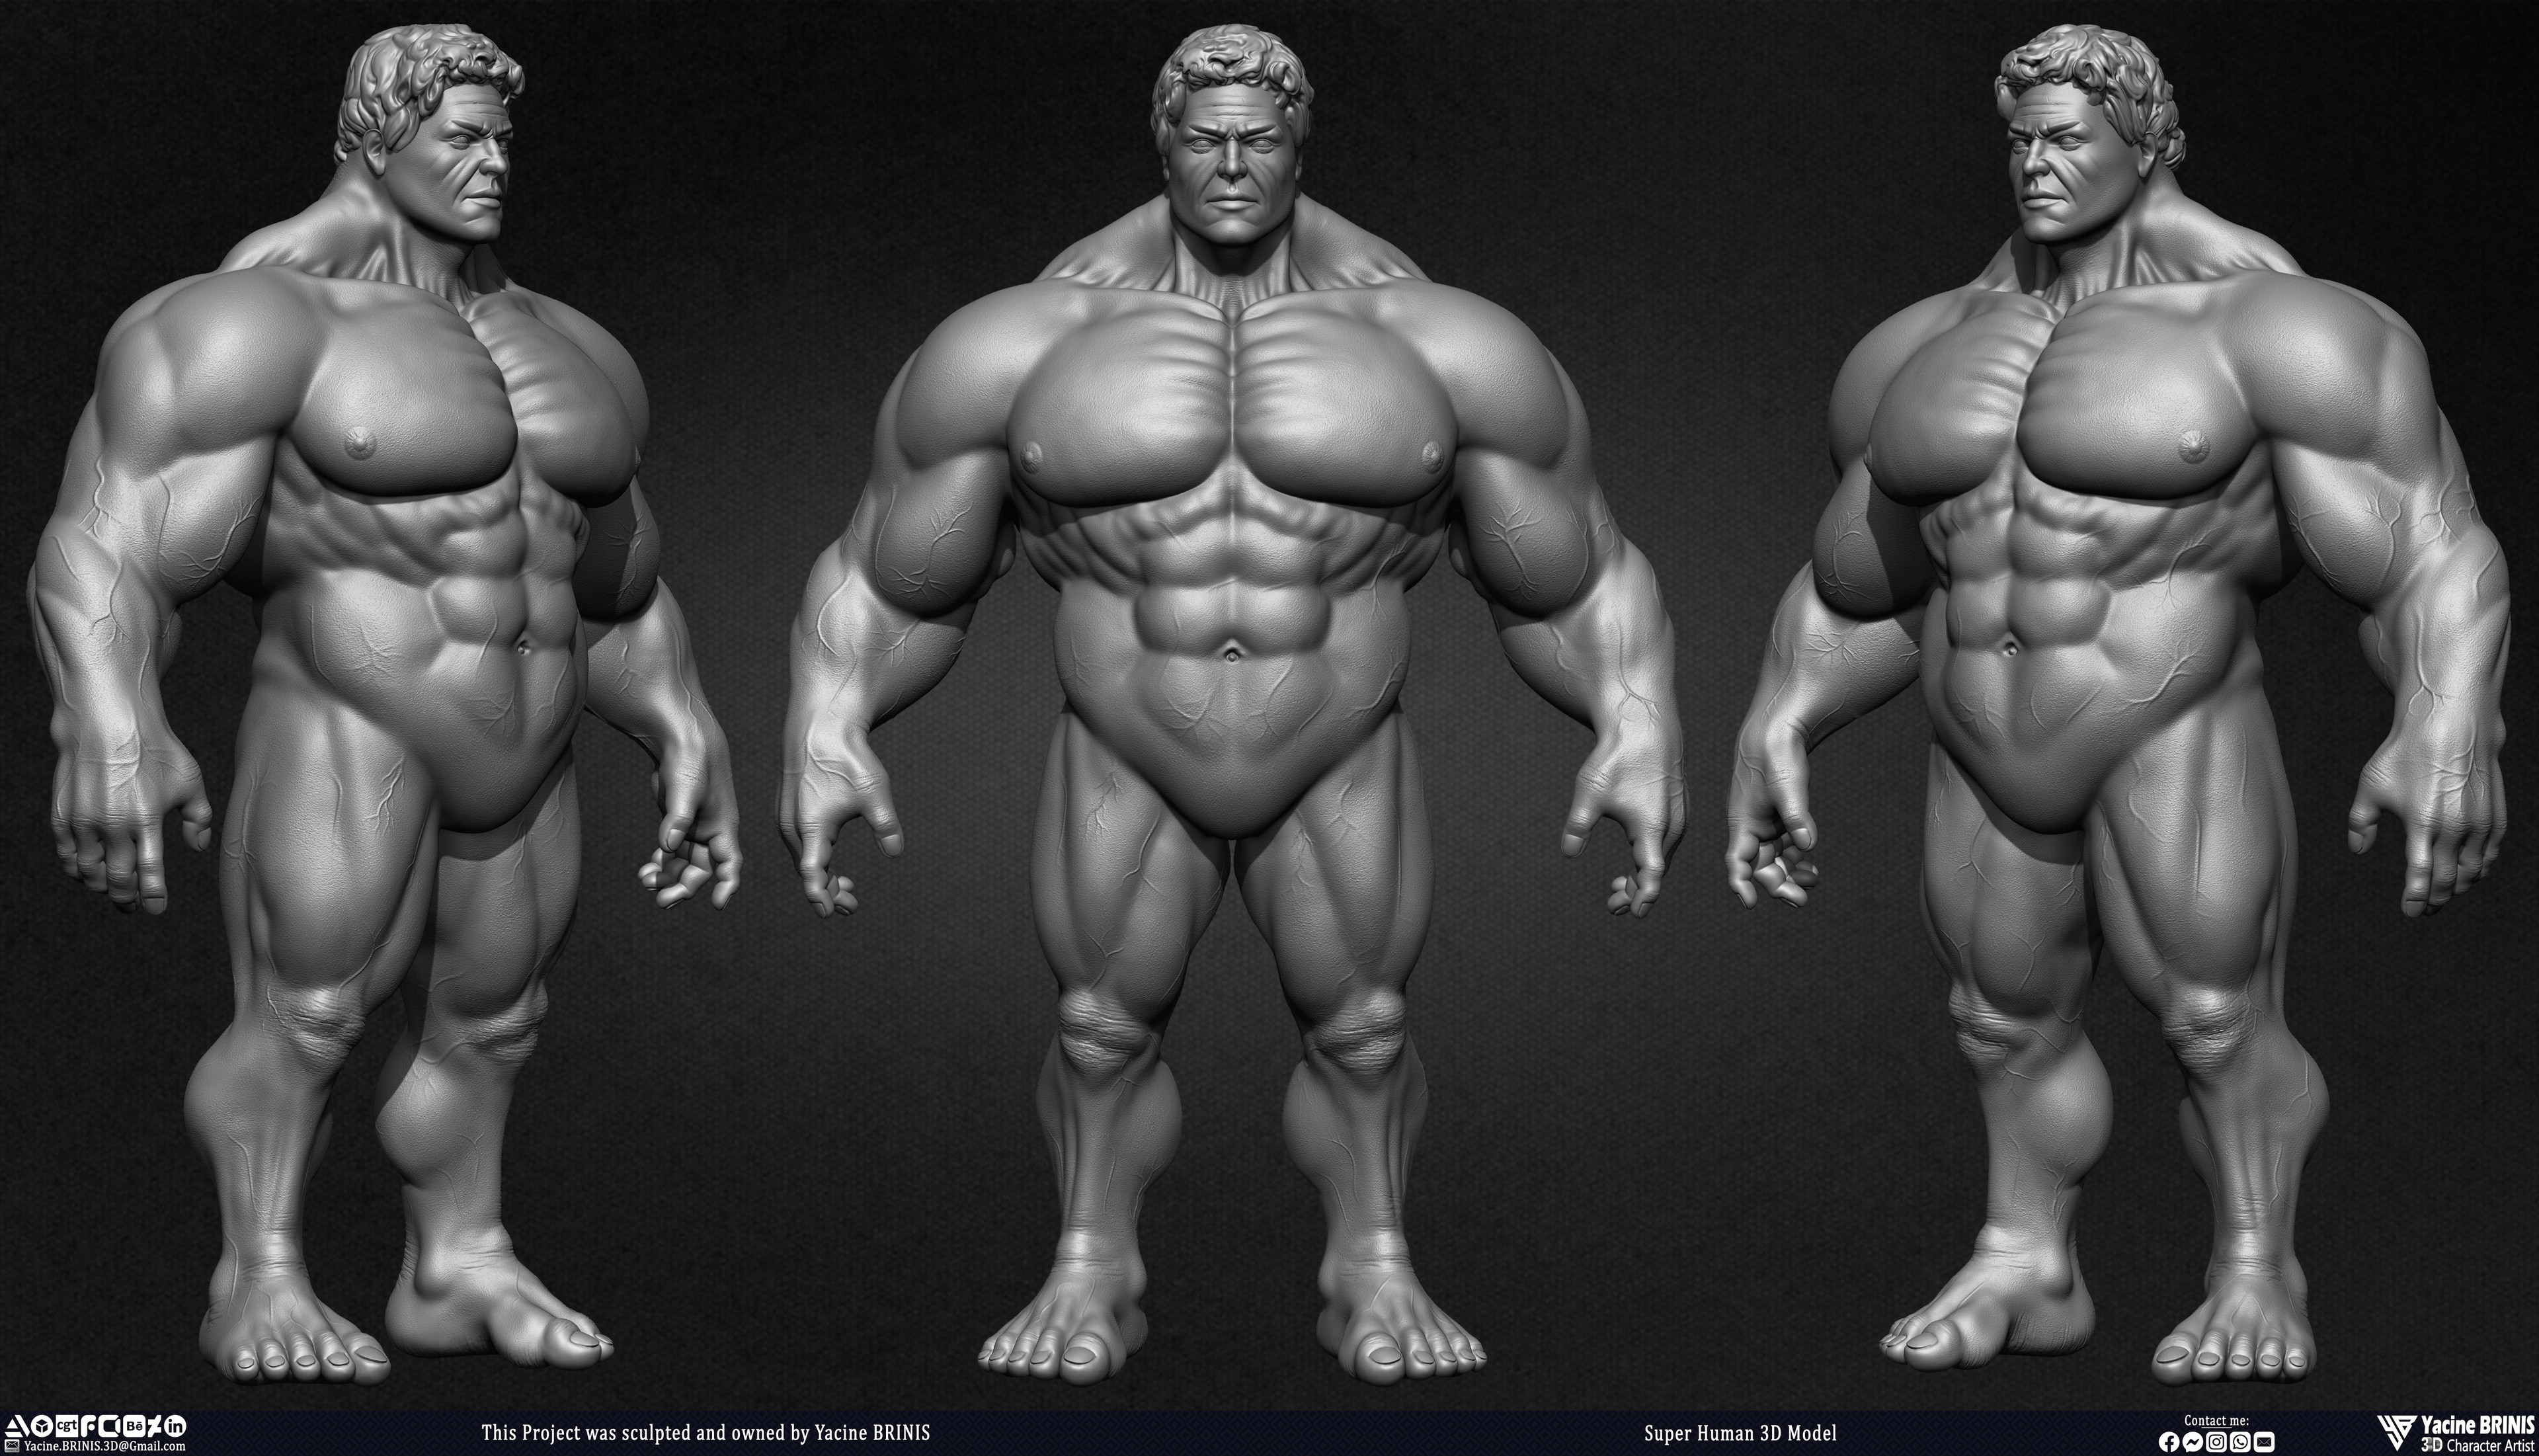 Super Human 3D Model sculpted by Yacine BRINIS 002